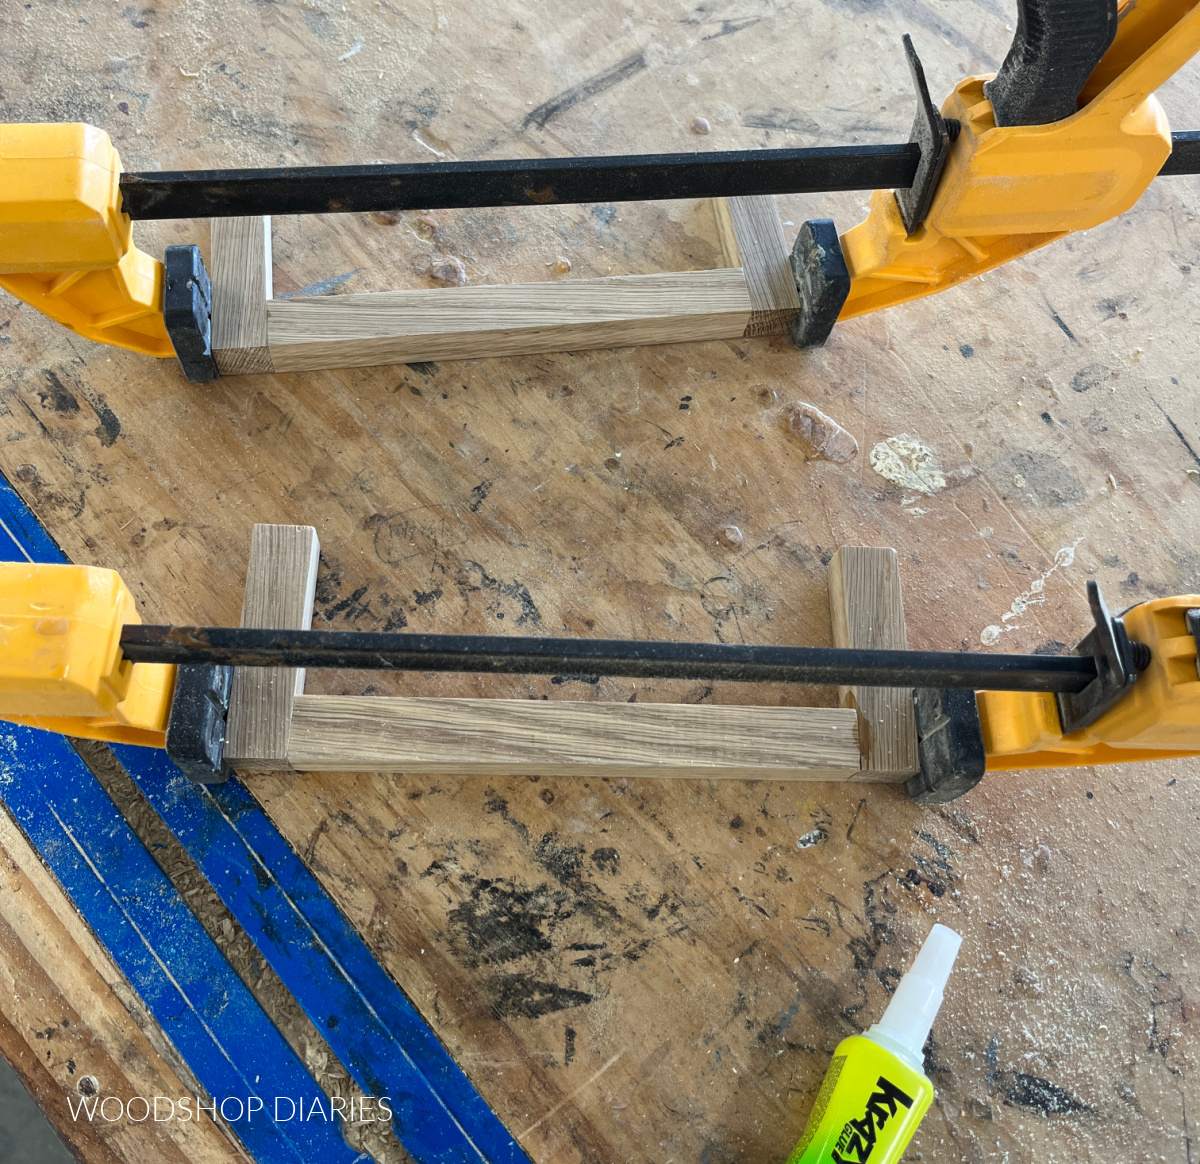 Risers in clamps on workbench